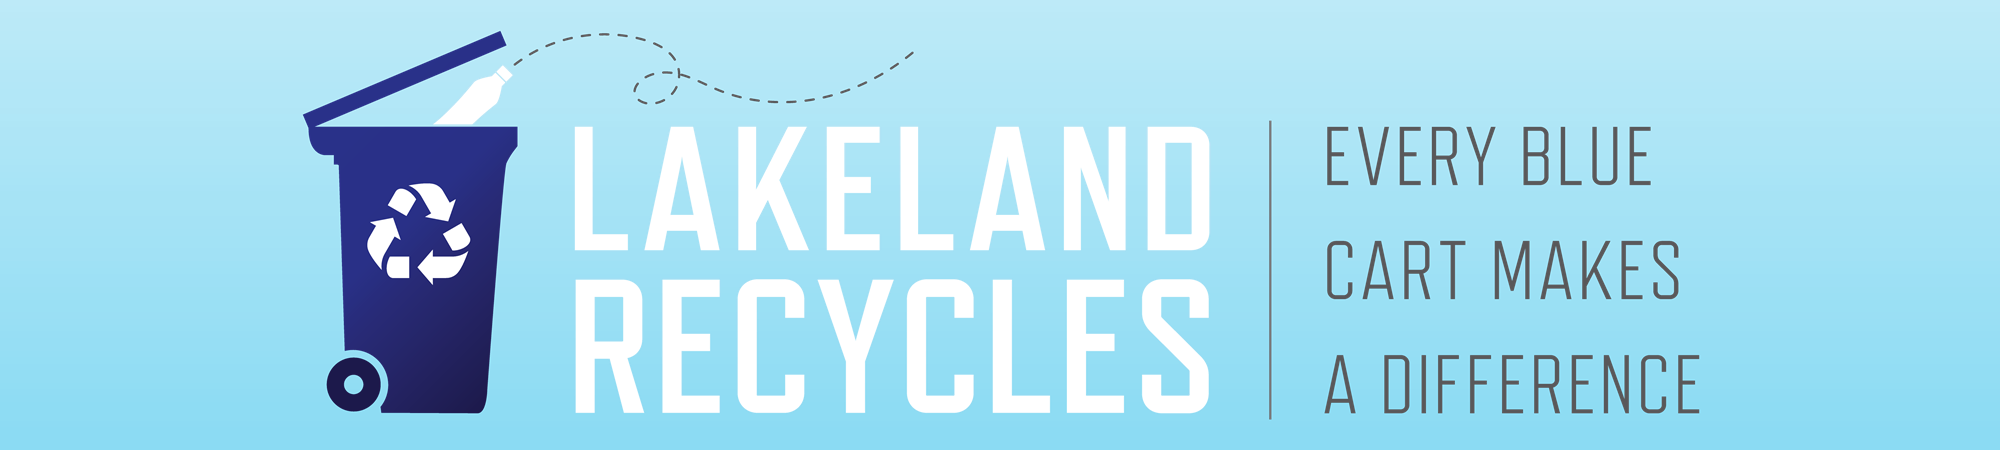 Lakeland Recycles Header with dark blue recycling bin and light blue background